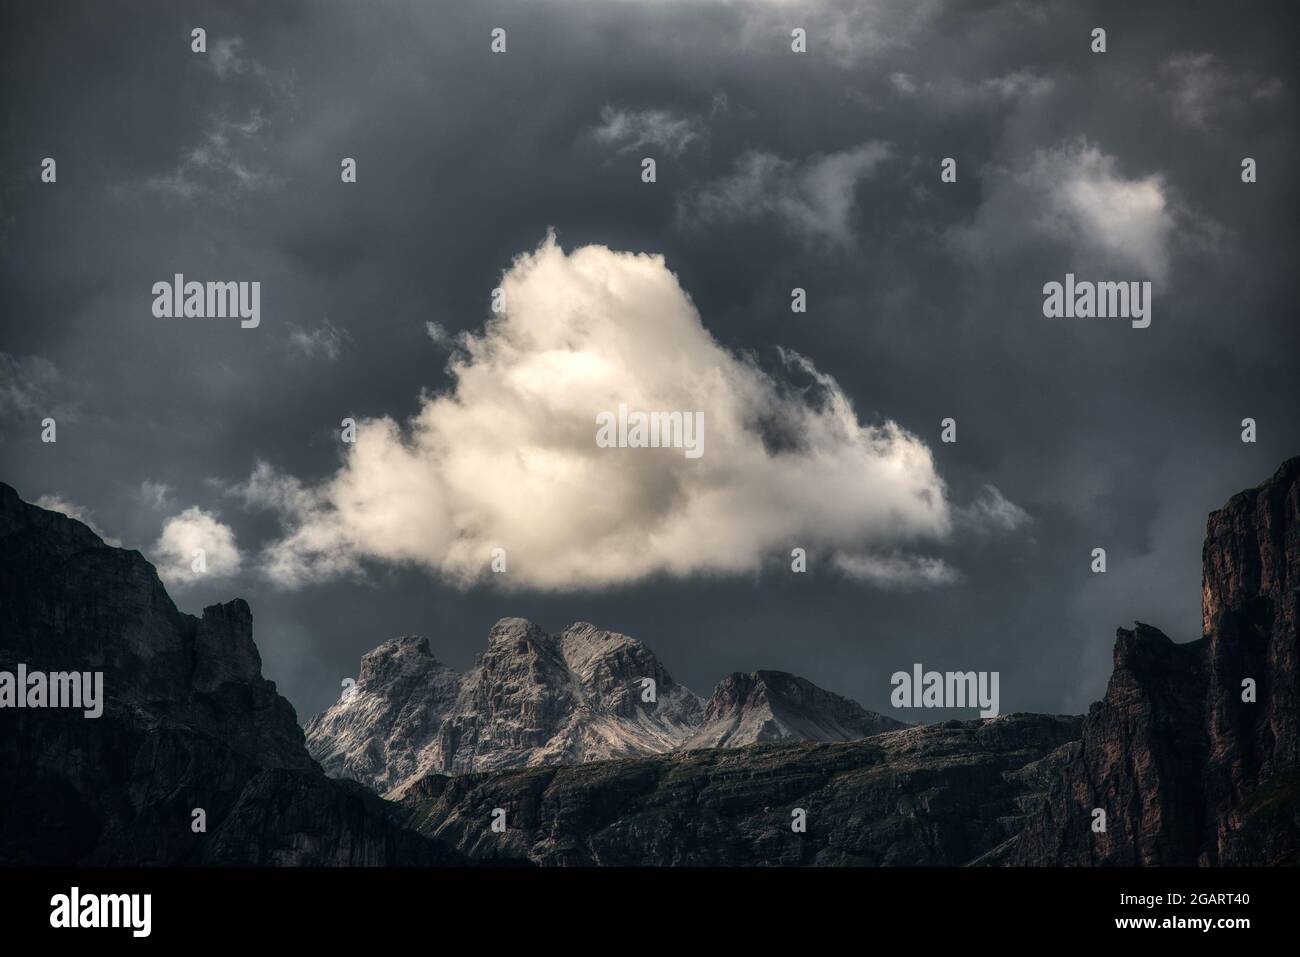 White cloud illuminated by the sun over the top of the mountains during the storm Stock Photo